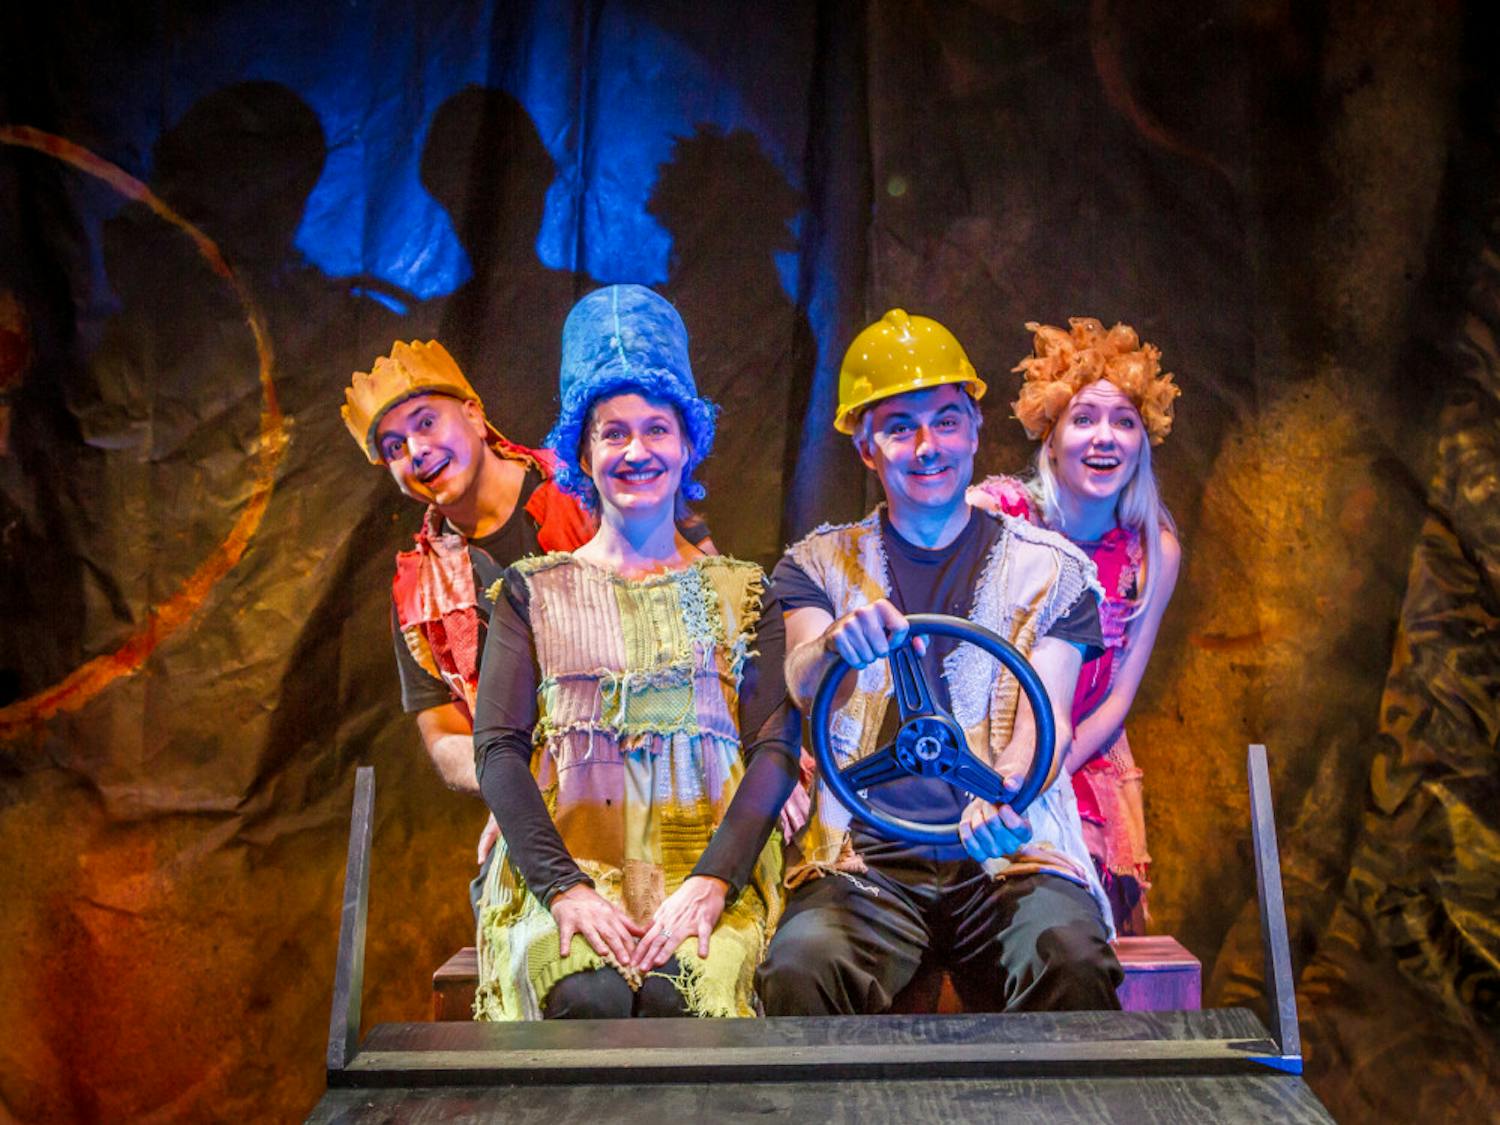 (From left to right) Charlie Mitchell, Stephanie Lynge, Matthew Lindsay and Marissa Toogood pose in a photo from the play, “Mr. Burns, a Post-Electric Play.” The Florida version of the play will be shown at the Hippodrome State Theatre through March 15.